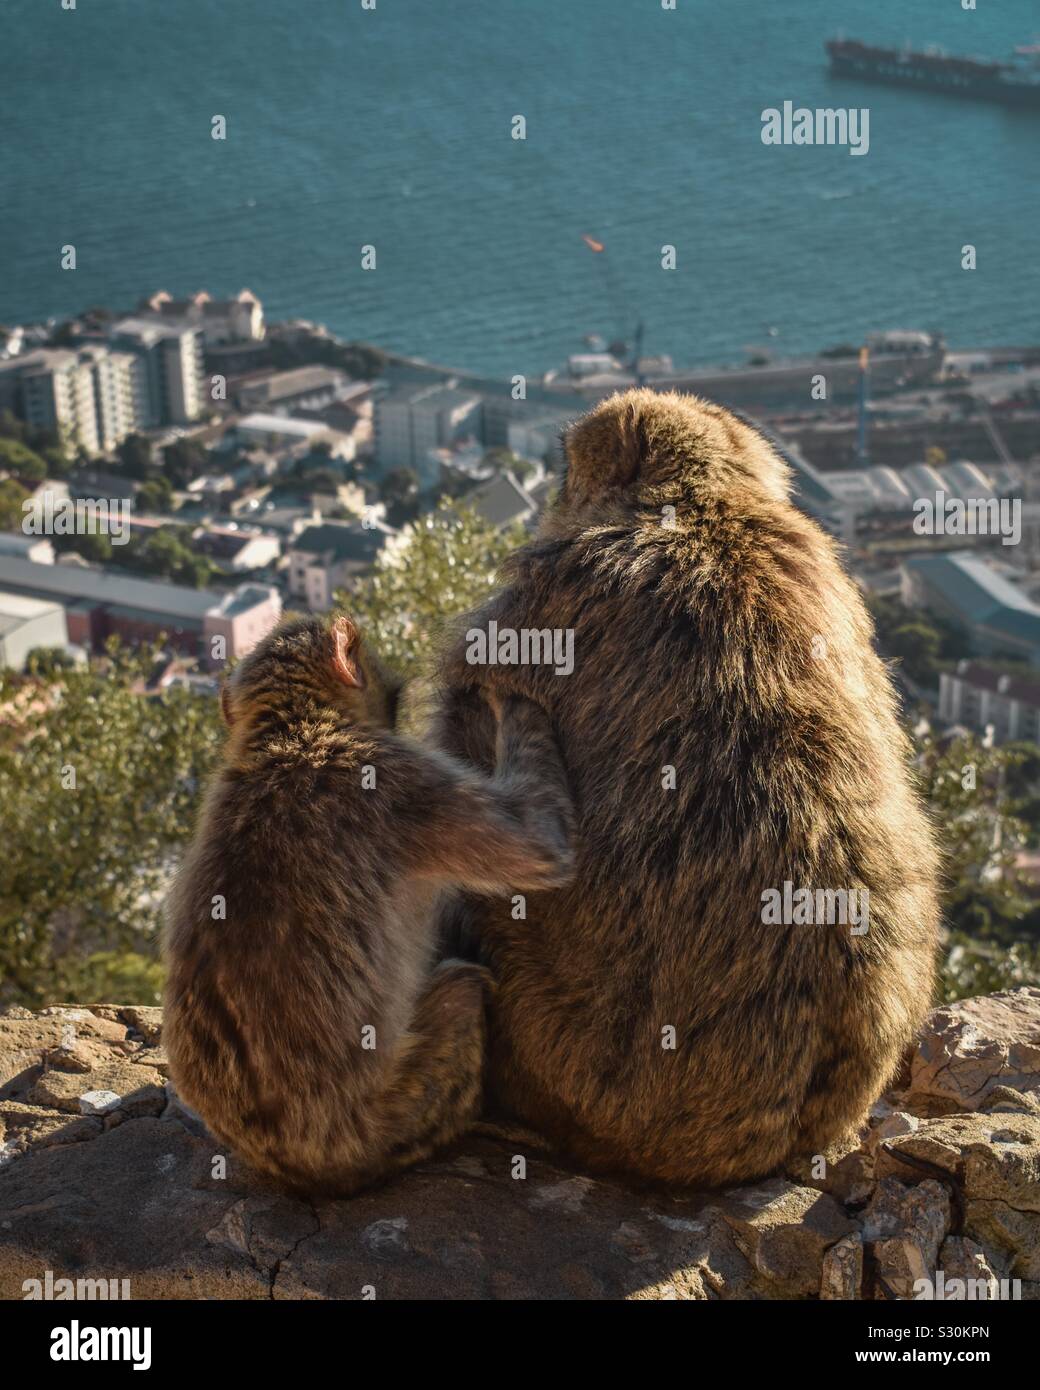 A mother and a child watching over the city Stock Photo